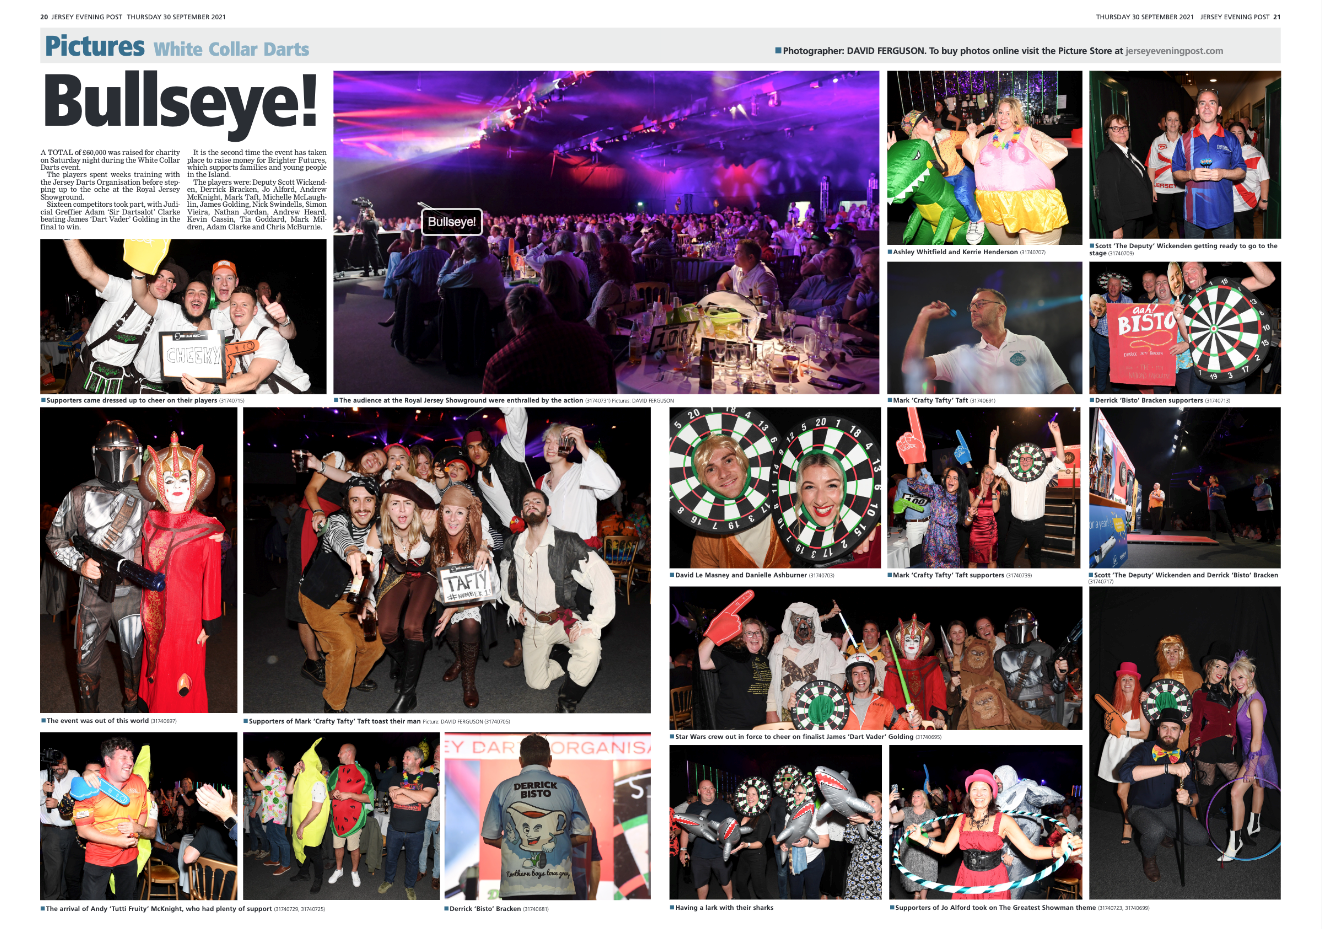 Bullseye - The JEP's coverage of our amazing event